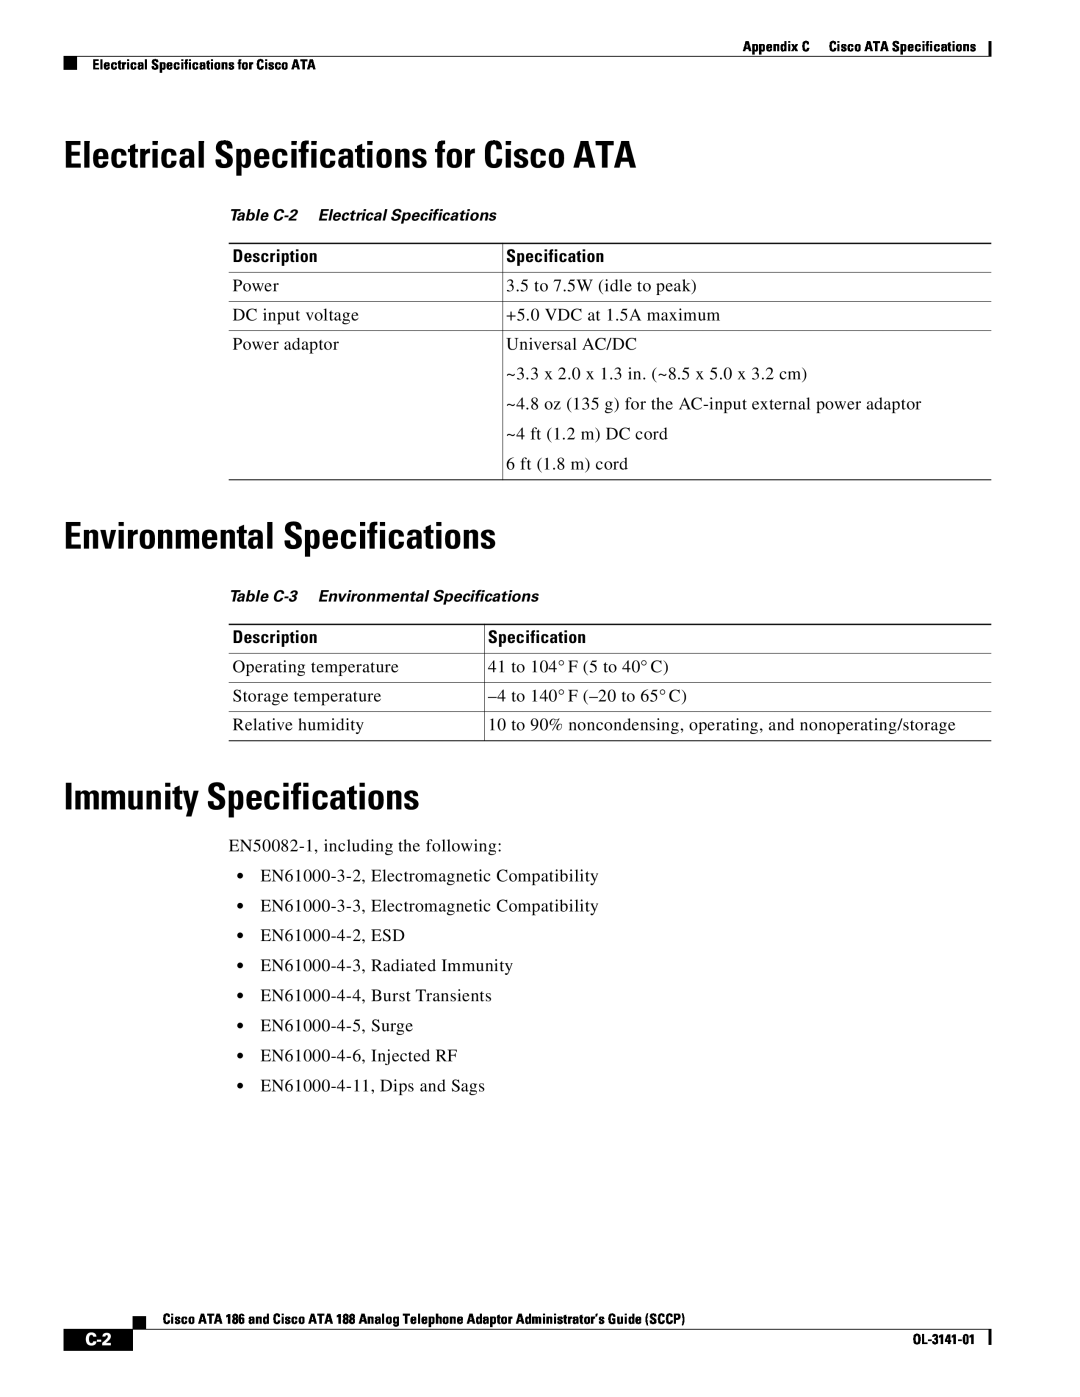 Cisco Systems ATA 186 manual Electrical Specifications for Cisco ATA, Environmental Specifications, Immunity Specifications 